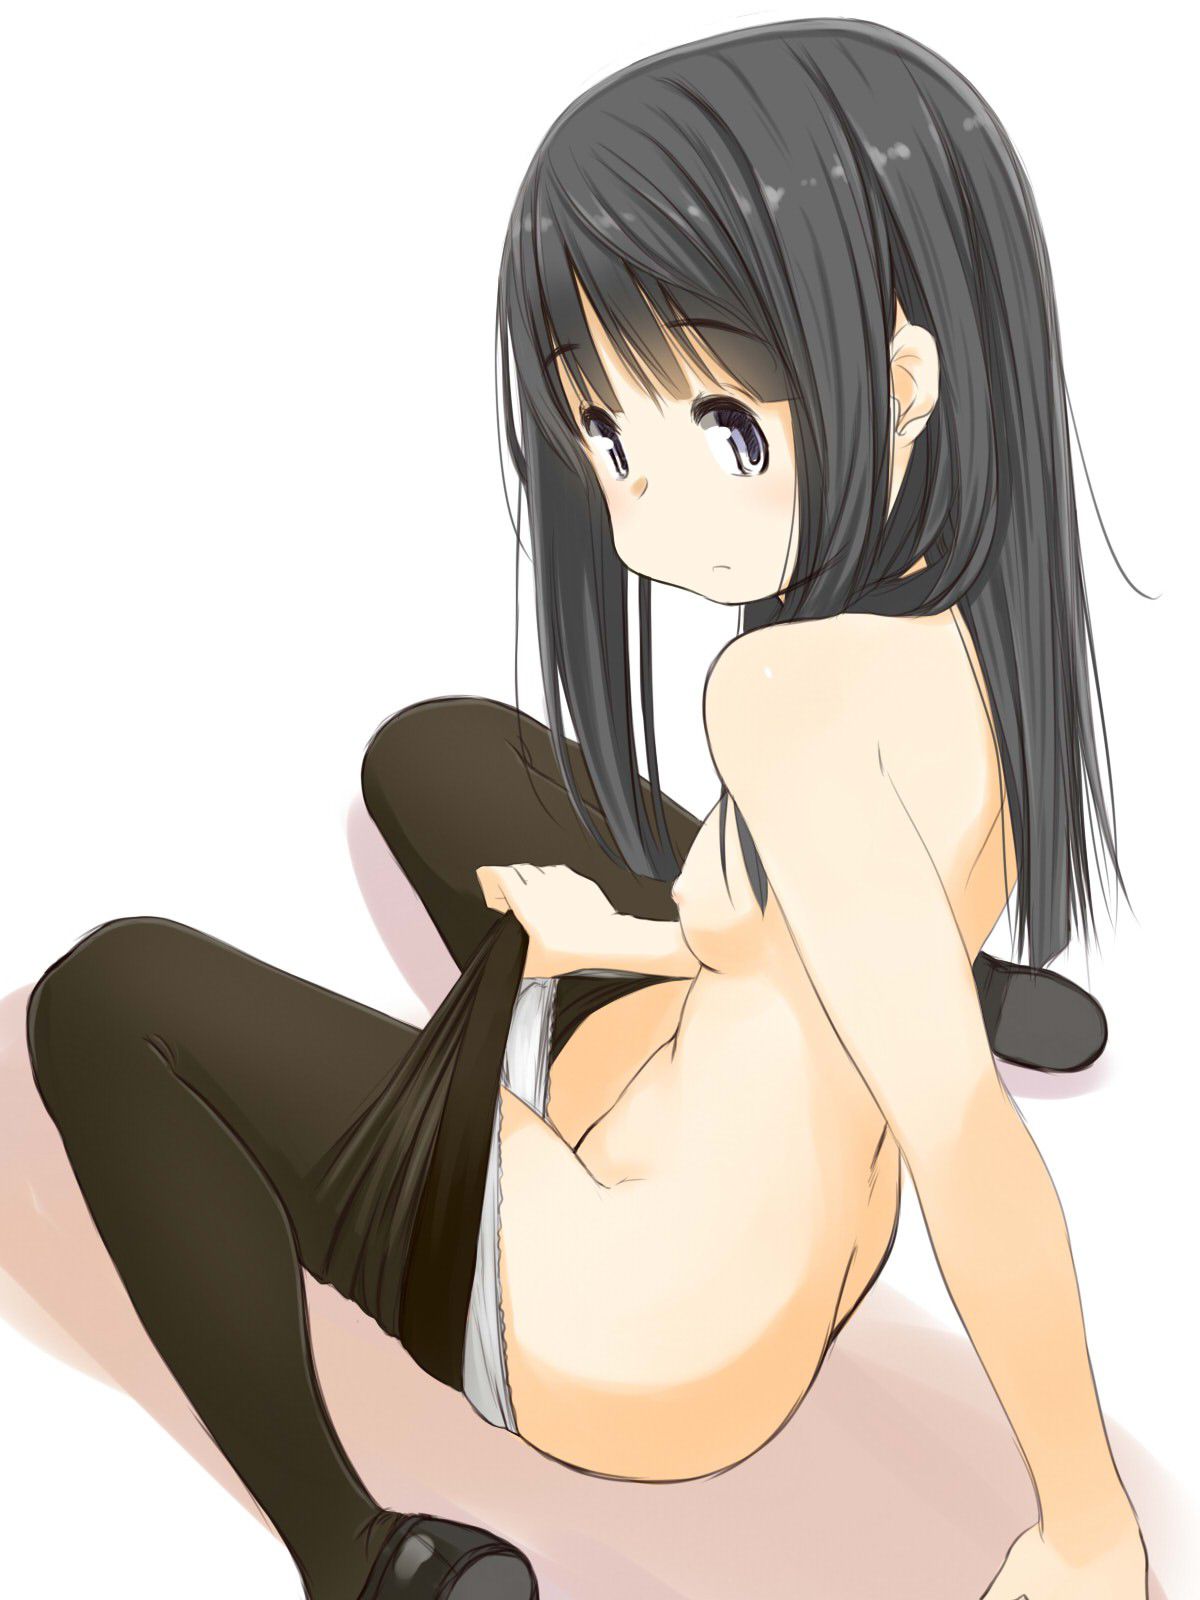 It is underwear second image スレ [about to wear it] during the putting on and taking off 11 [about to take it off] 22